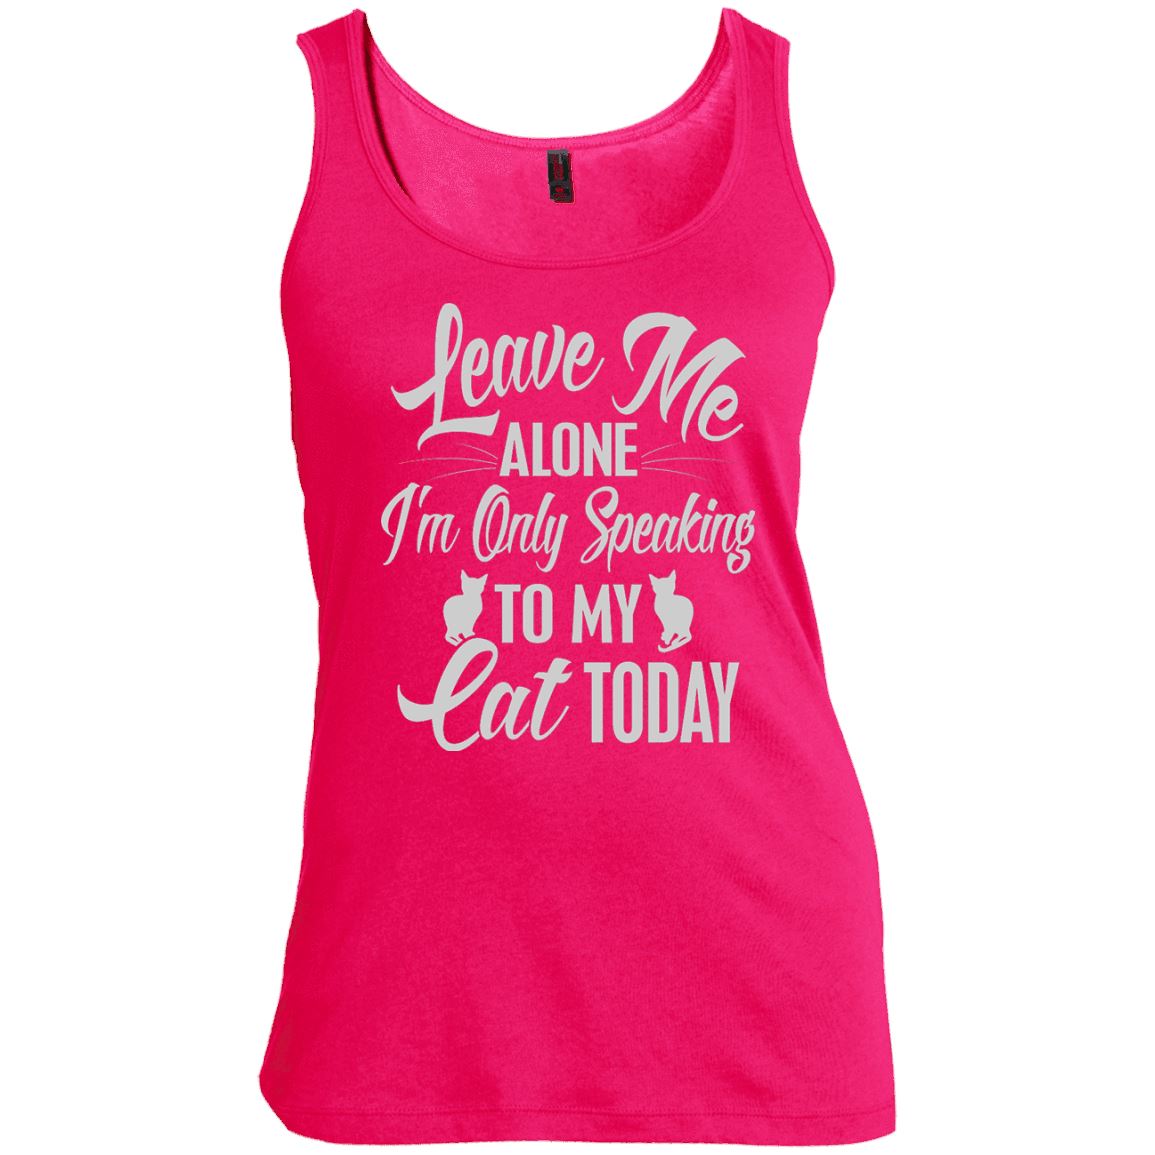 Cat Tee - Leave Me Alone, I'm Only Speaking To My Cat Today - CatsForLife